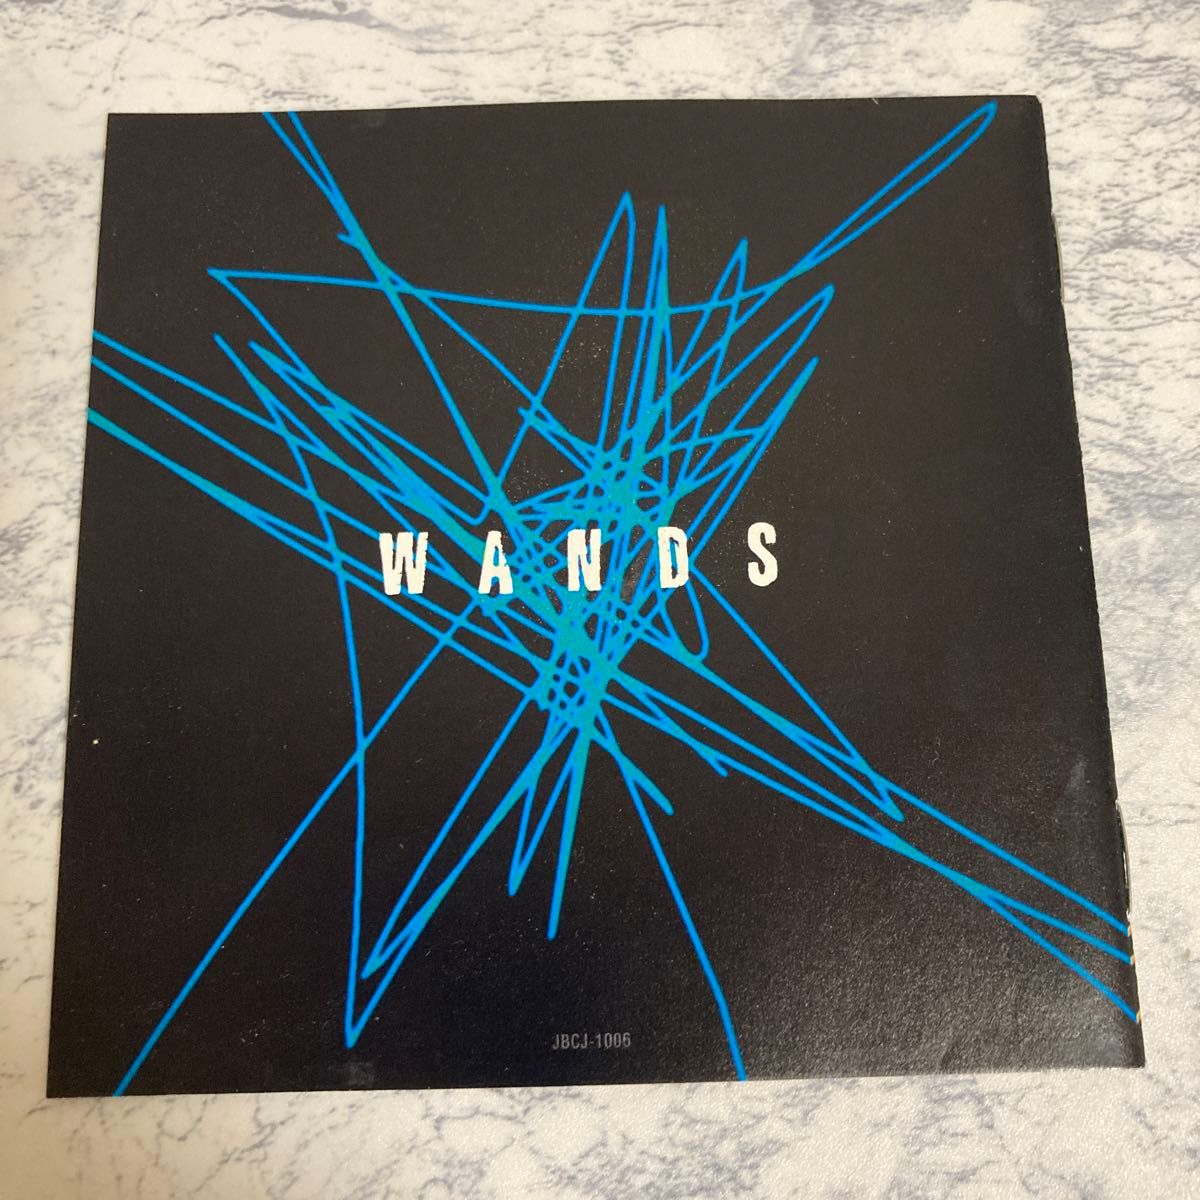 【CDジャンク品】WANDS SINGLES COLLECTION 